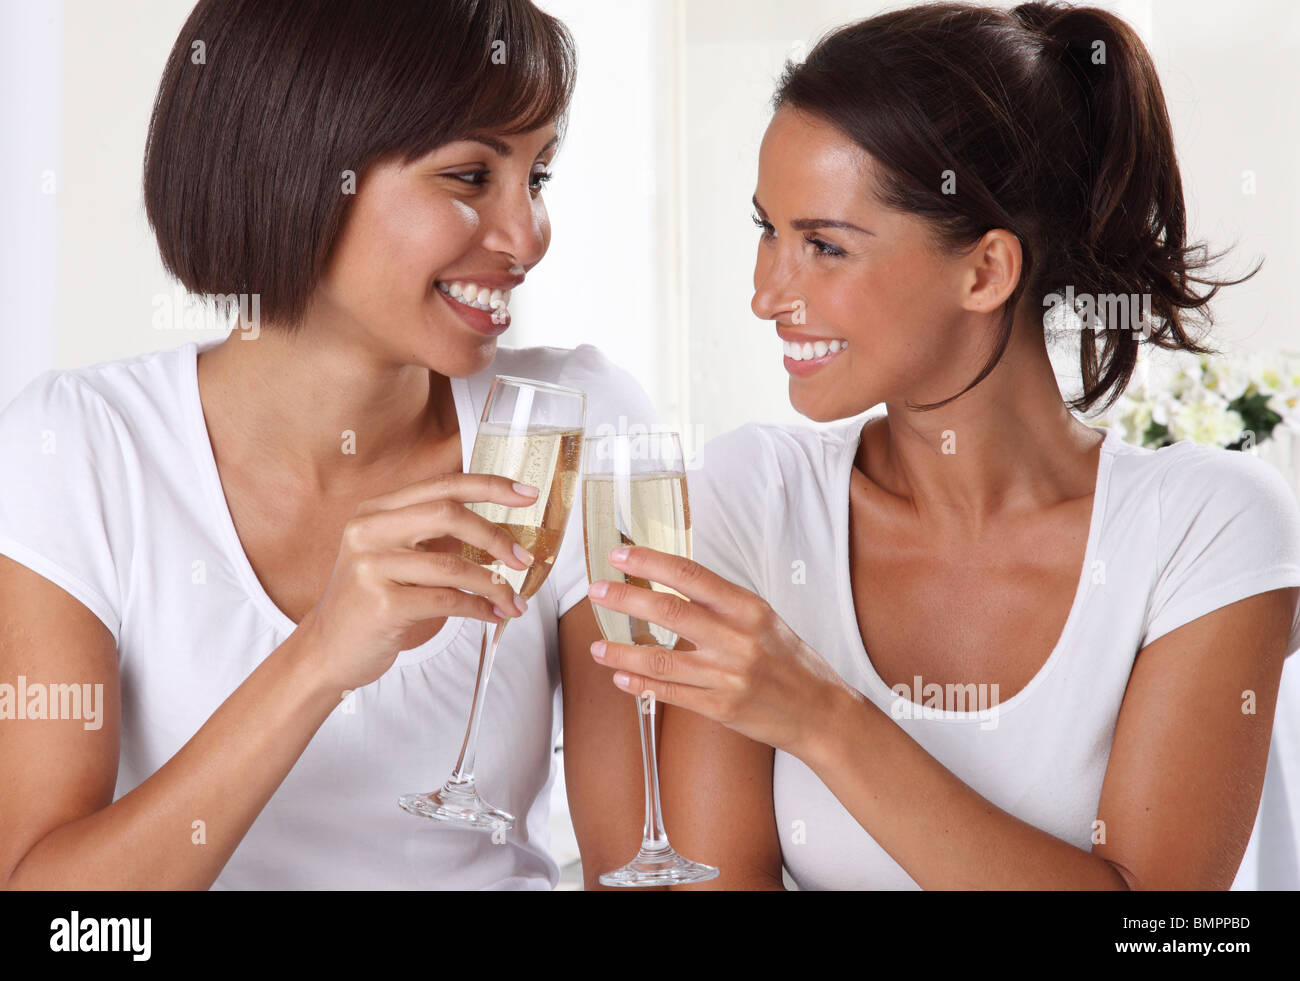 TWO WOMEN DRINKING CHAMPAGNE Stock Photo